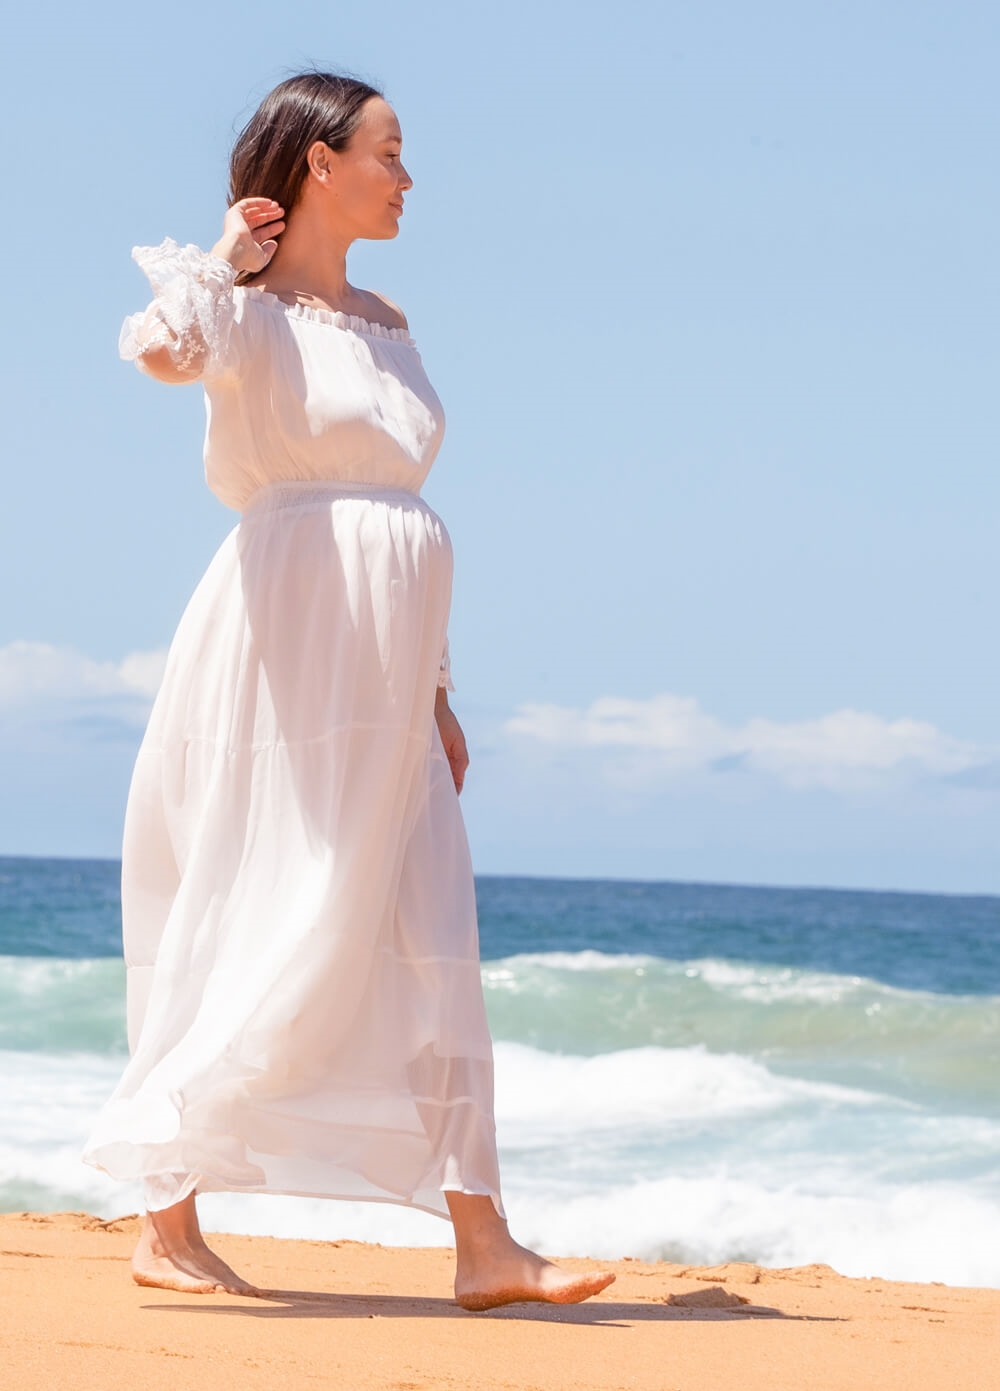 Lait & Co - Ruby-Grace Lace Sleeve Maternity Gown in White